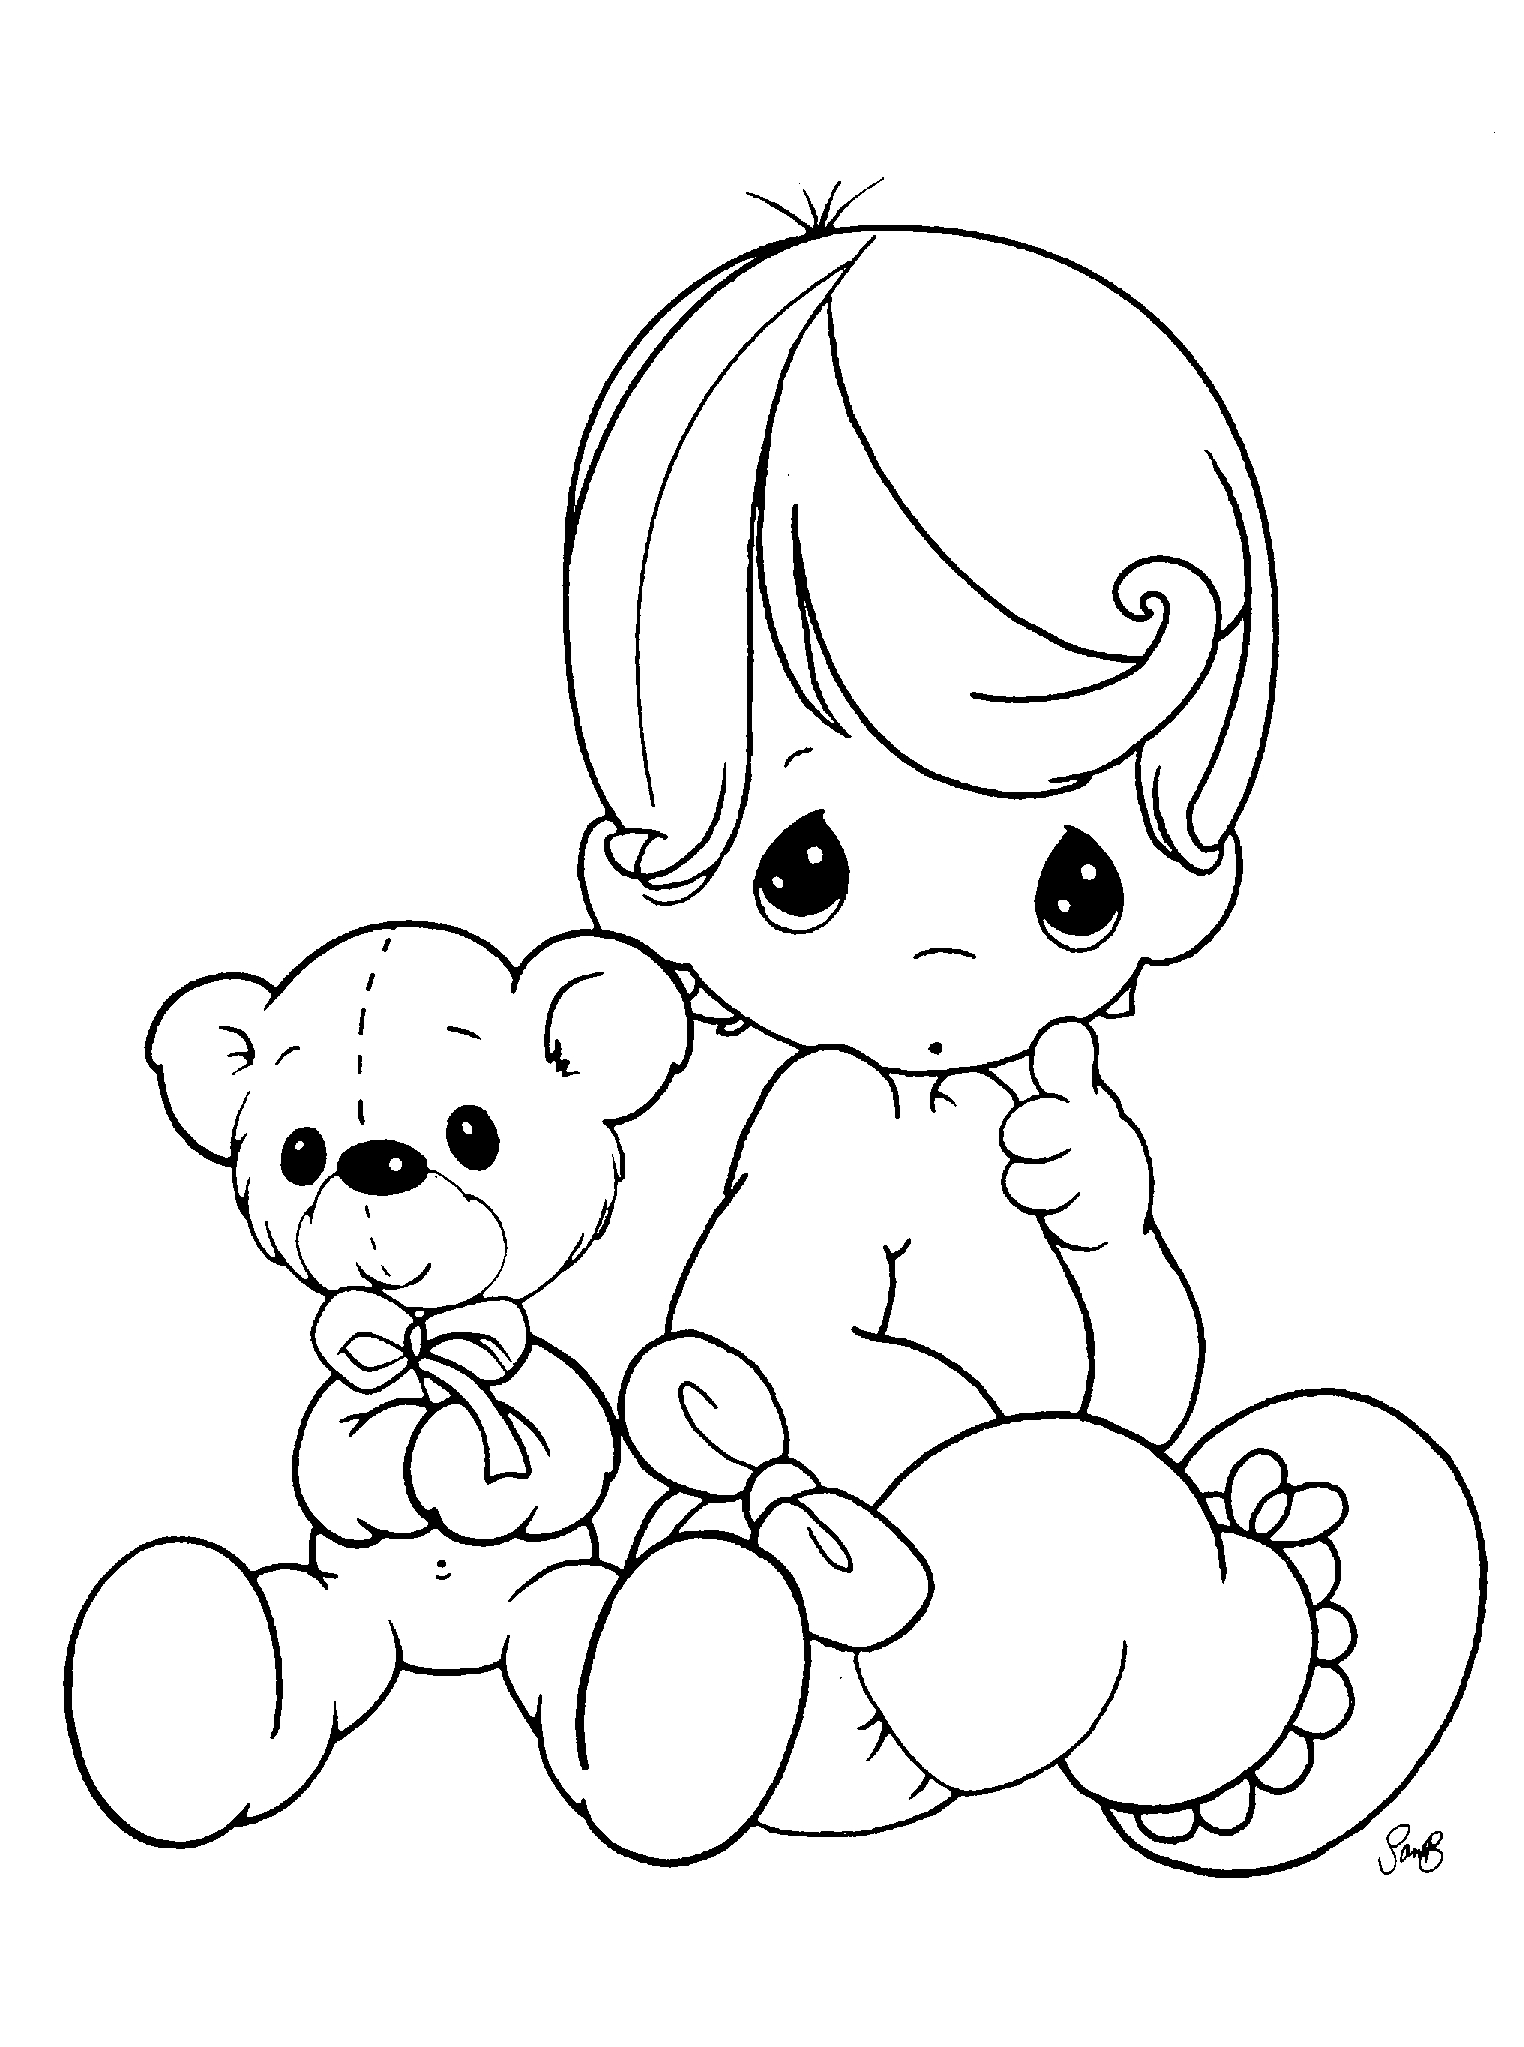 Precious Moments Baby Coloring Pages Coloring Pages Coloring Pages Freeintableecious Moments For Kids